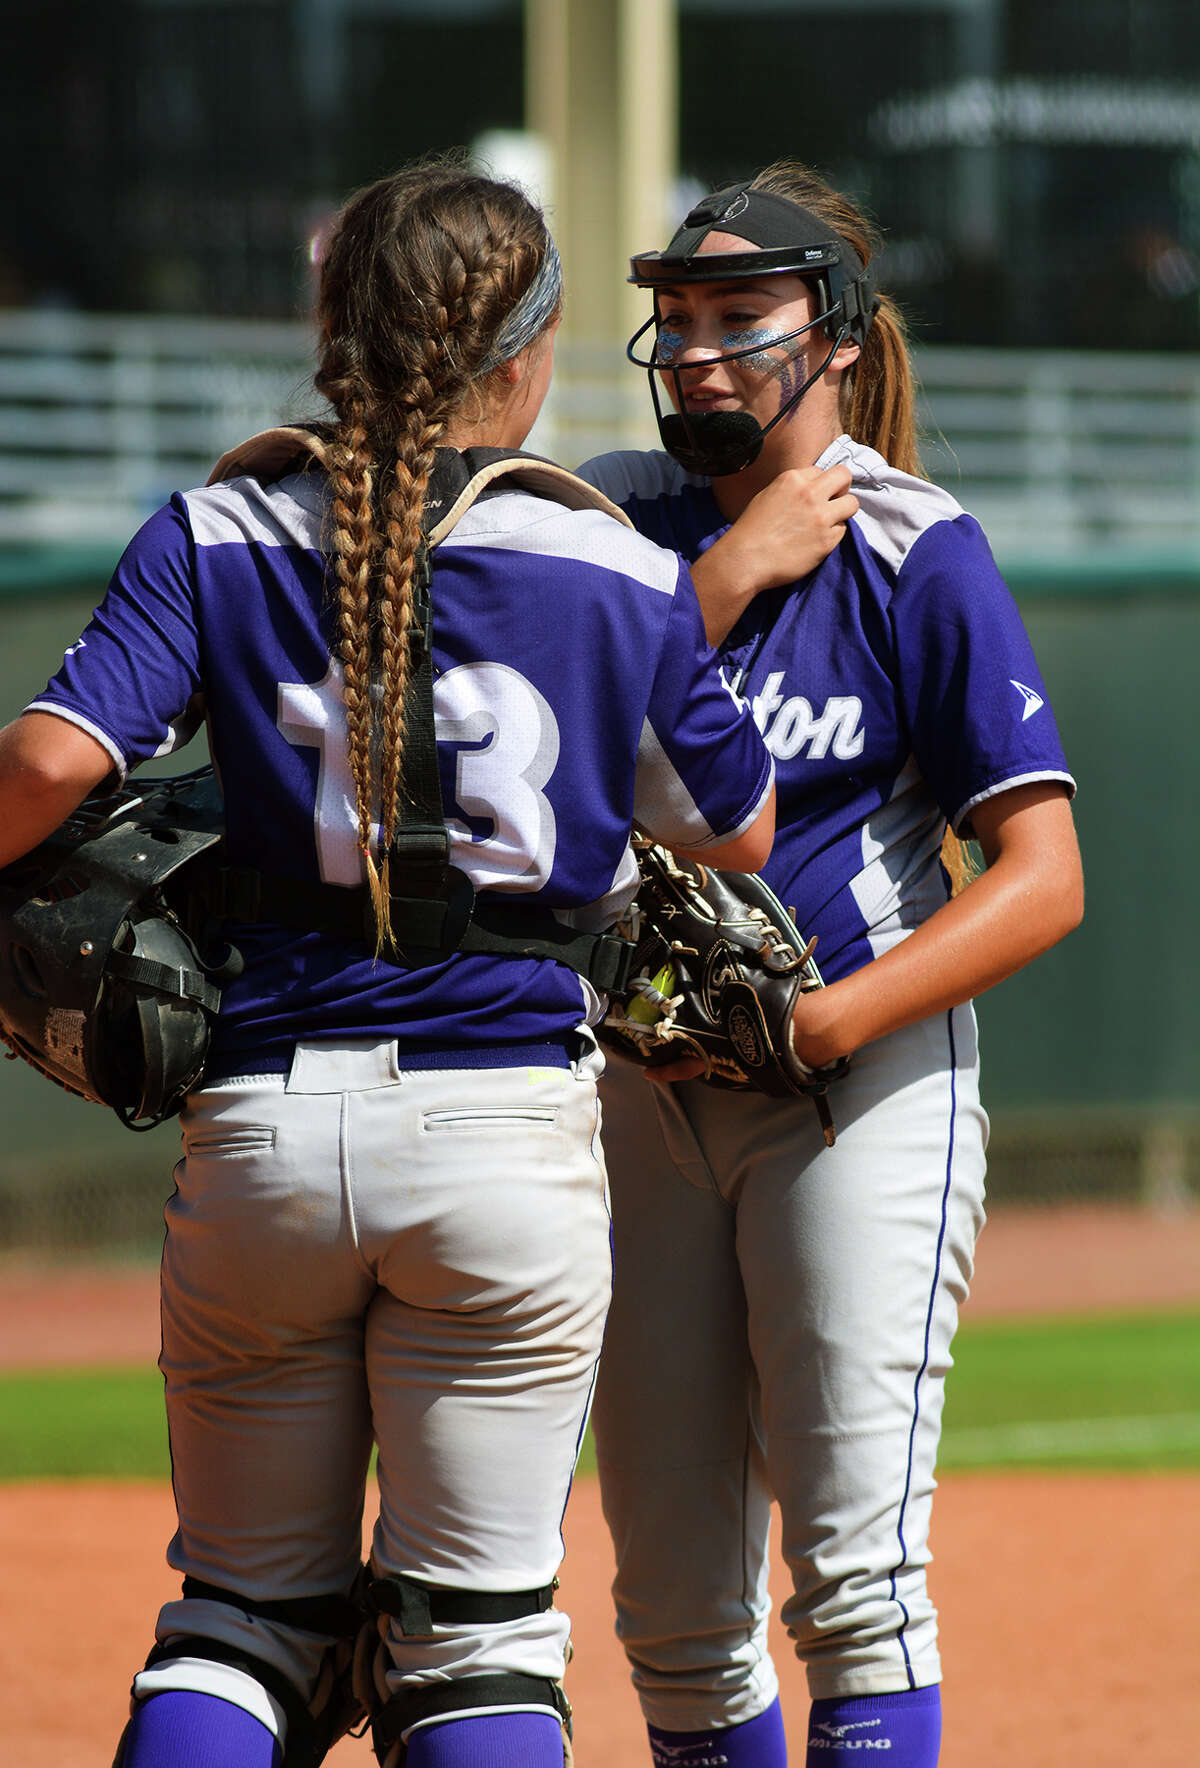 Angleton freshman pitcher Aaliyah Garcia, right, gets some re-assurance from Wildcat junior catcher Briana Cantu during the bottom of the 4th inning of their Class 5A semifinal matchup with Gregory-Portland at the 2016 UIL Softball State Championships at McCombs Field in Austin on Friday, June 3, 2016. (Photo by Jerry Baker/Freelance)